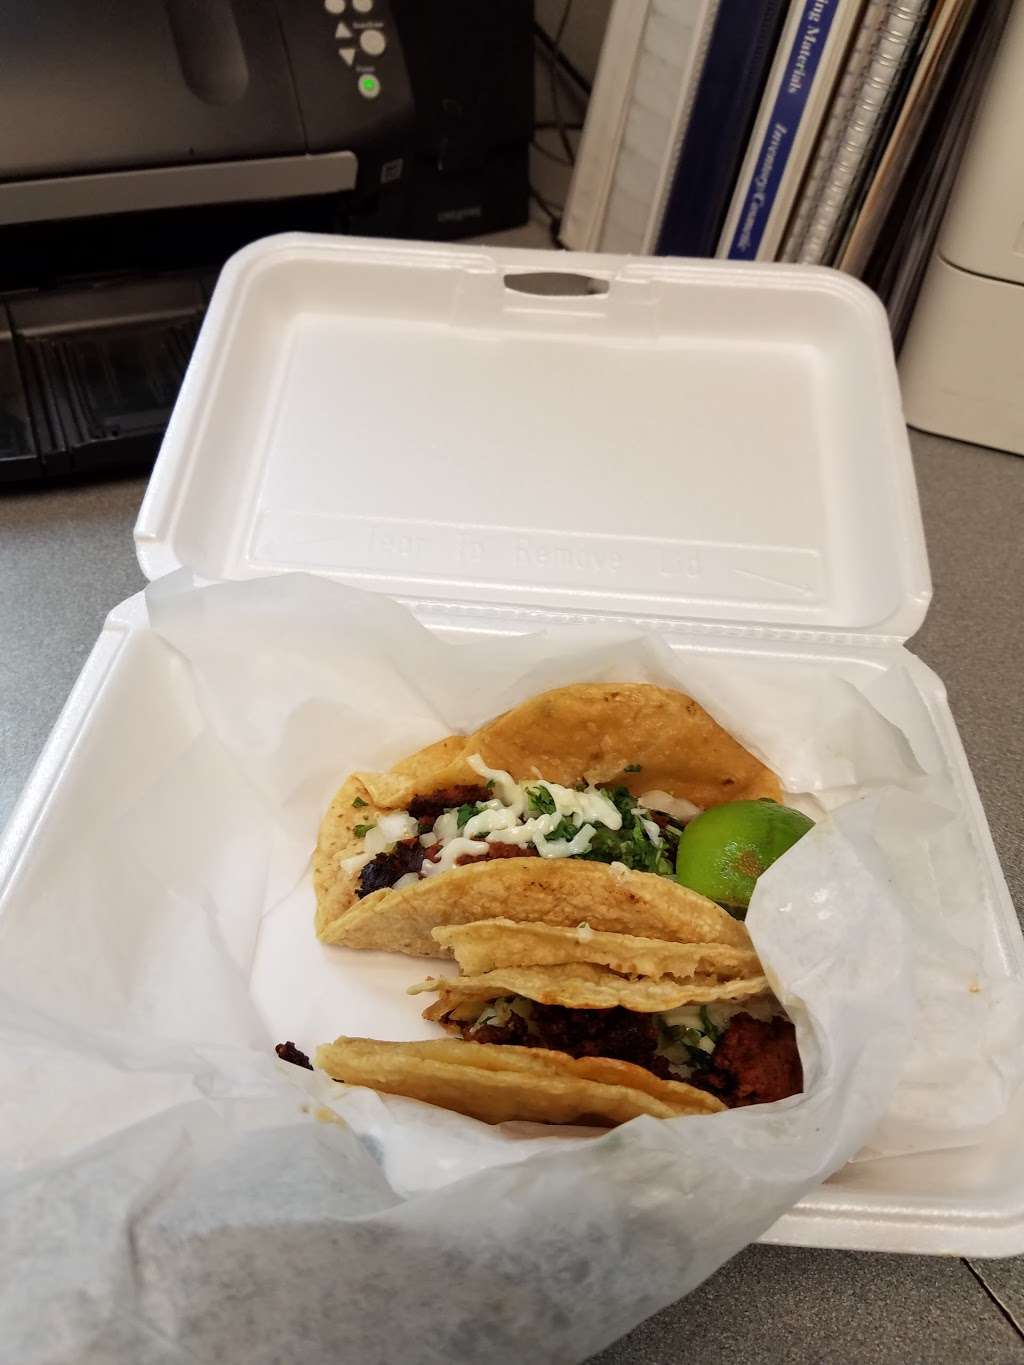 Breakfast 96 & Tacos | 4825 E 96th St Suite 1500, Indianapolis, IN 46240 | Phone: (317) 669-0240